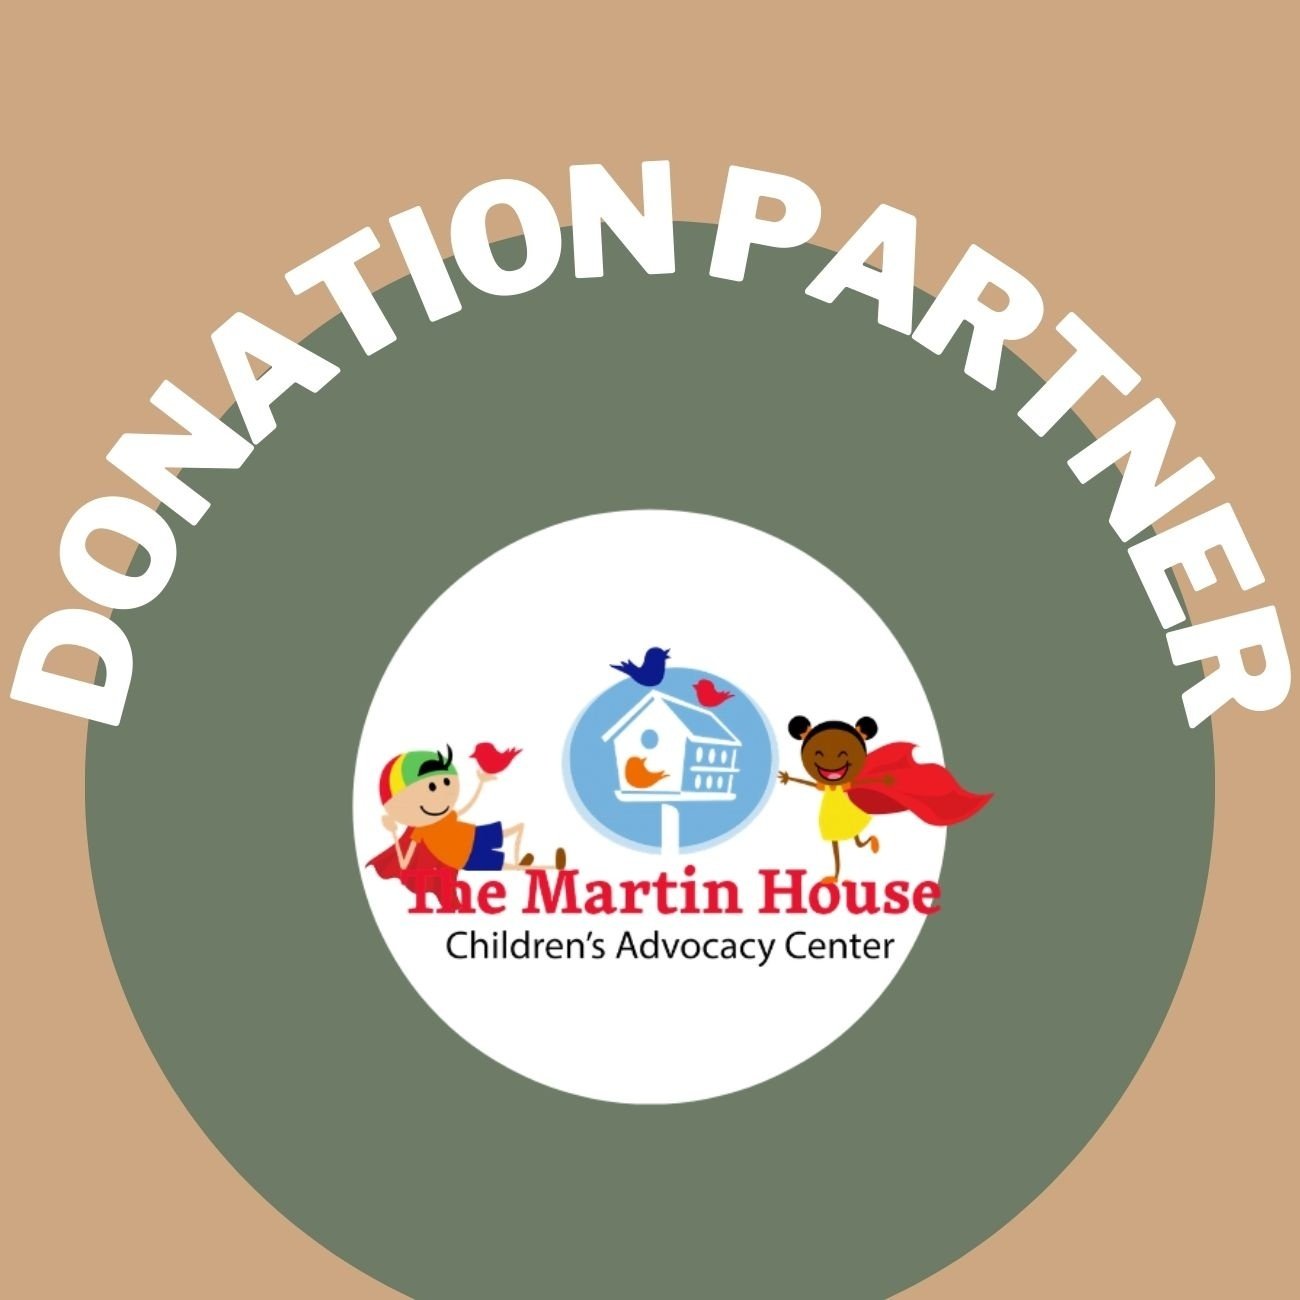 We're excited to announce our VIEW Eyewear donation partner for quarter two, The Martin House!! 5% of every View Eyewear package sold this quarter will be donated to The Martin House Children's Advocacy Center!